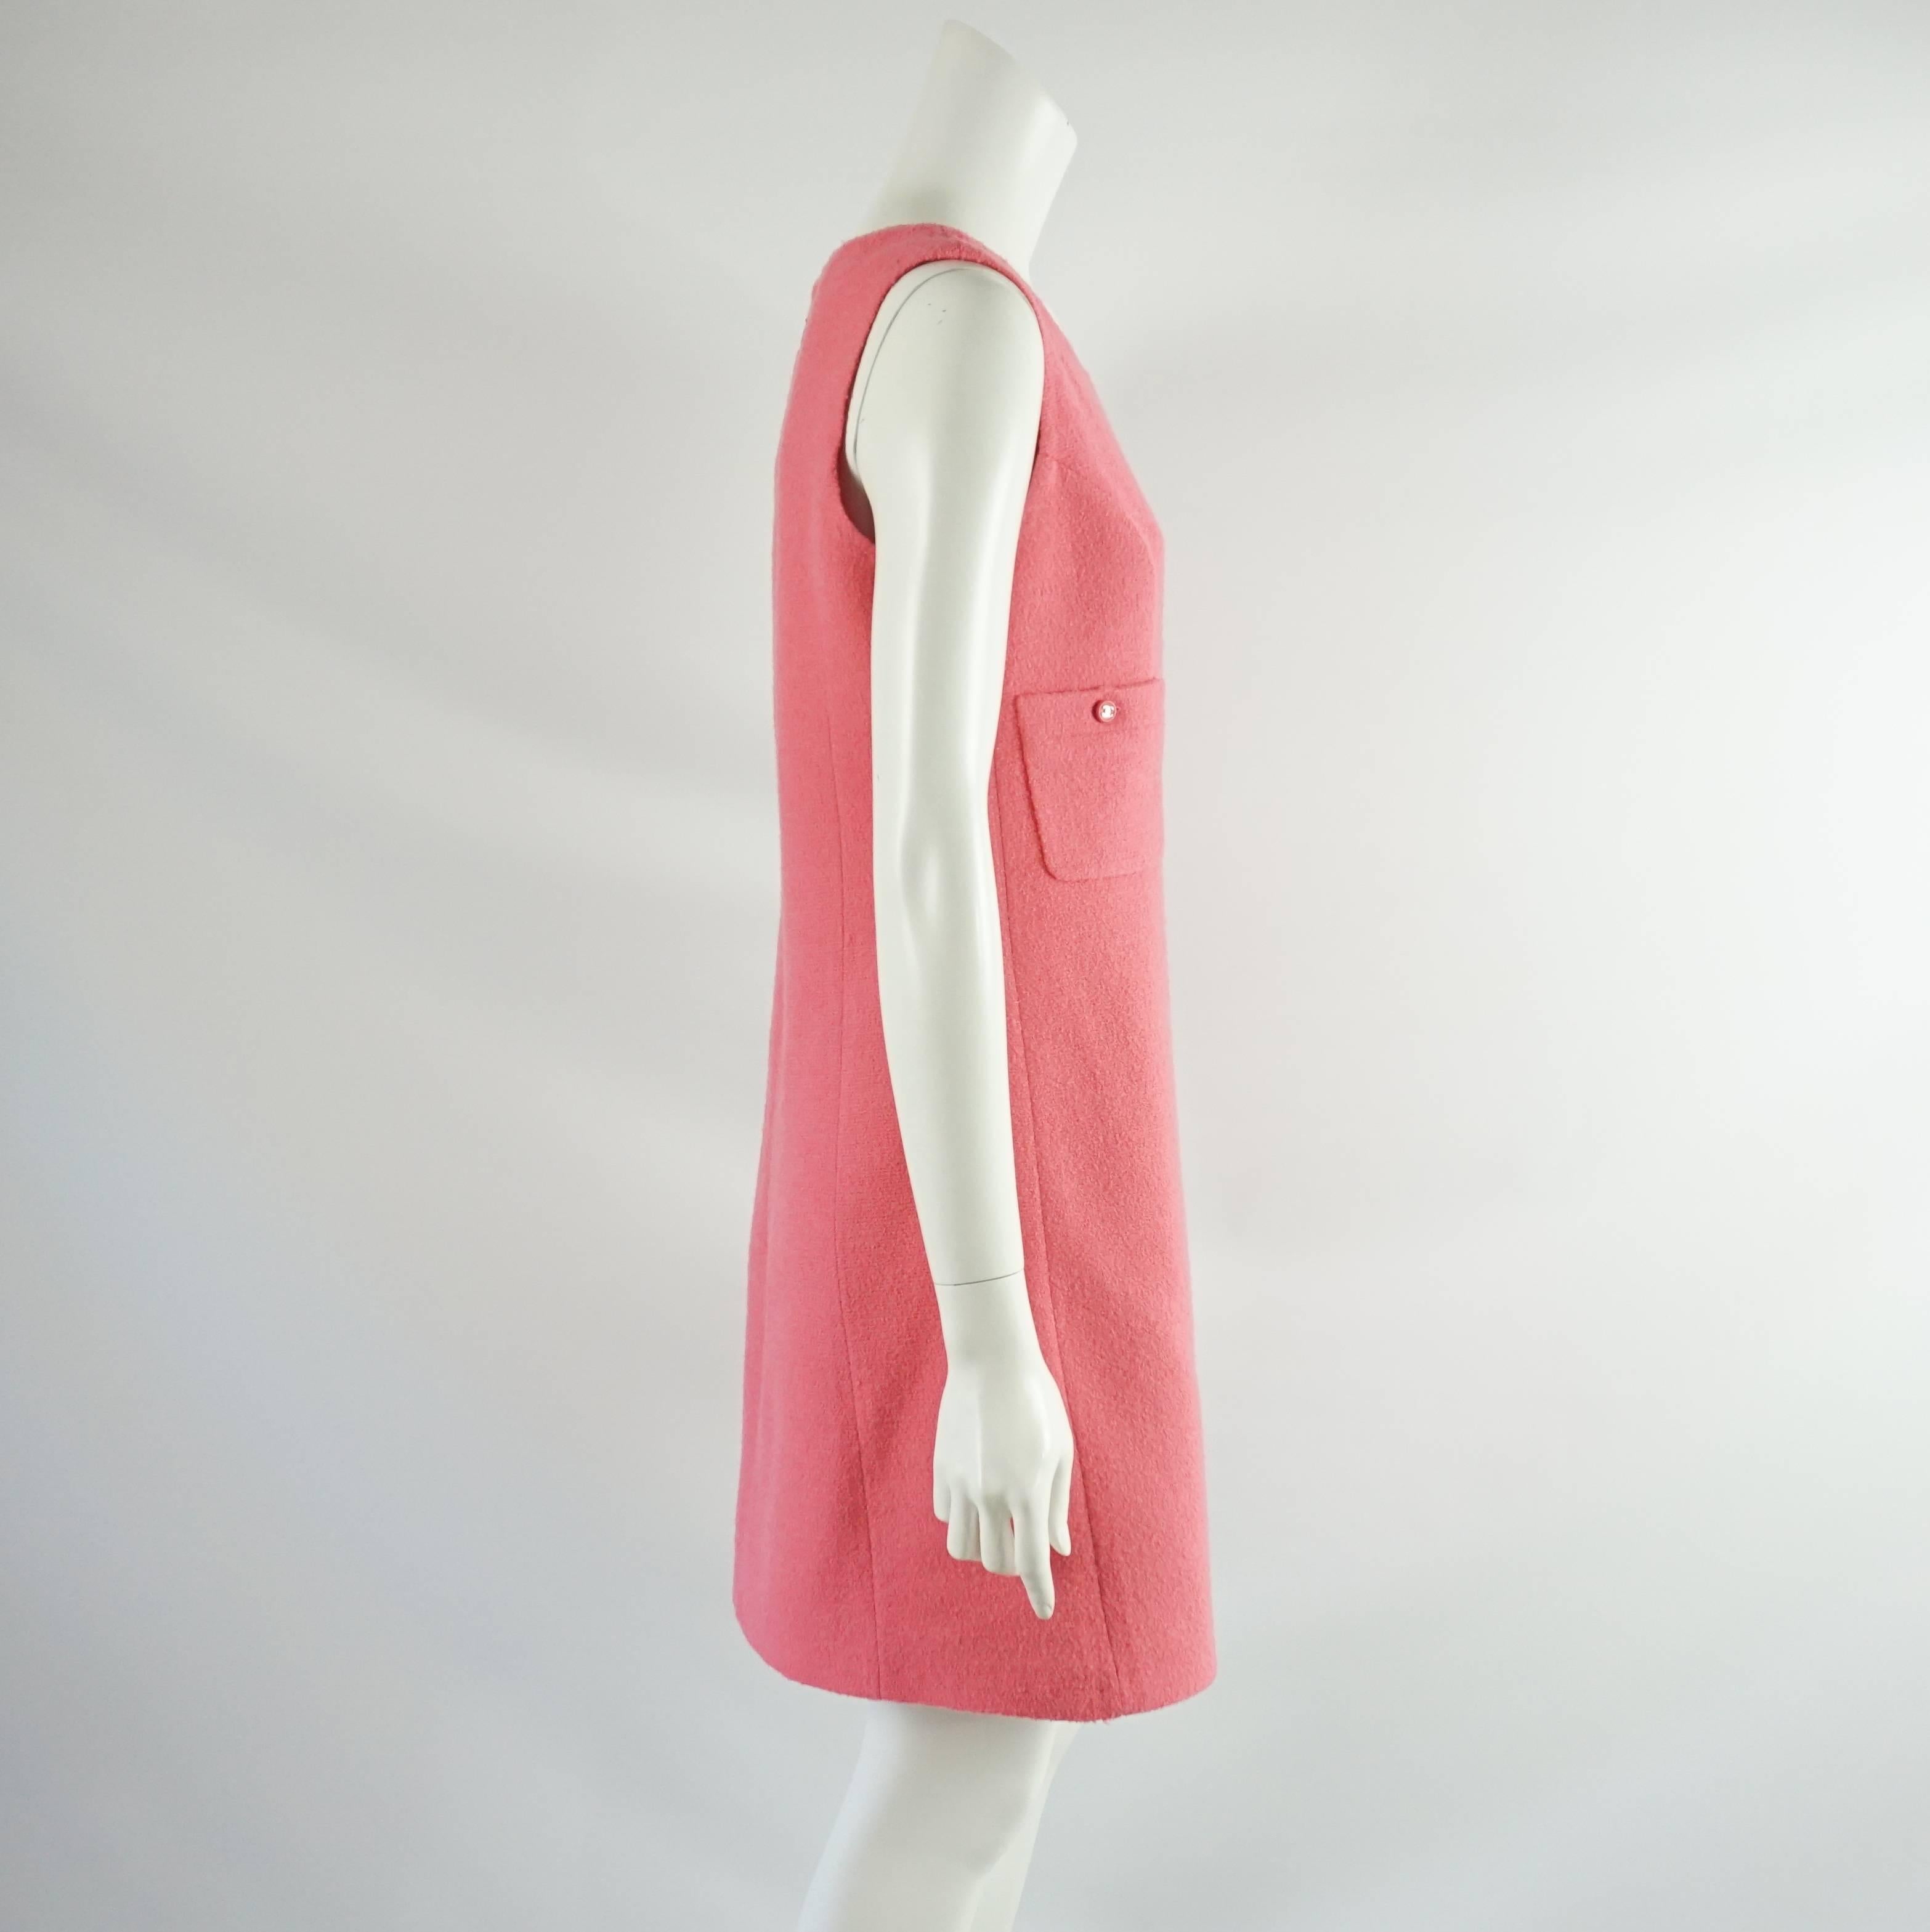 This beautiful Chanel sleeveless dress is pink wool. There are 2 front pockets with 2 buttons, both pink with a silver Chanel logo. This piece is very good condition with paint chipped on the zipper and interior underarm staining. Size 8, circa